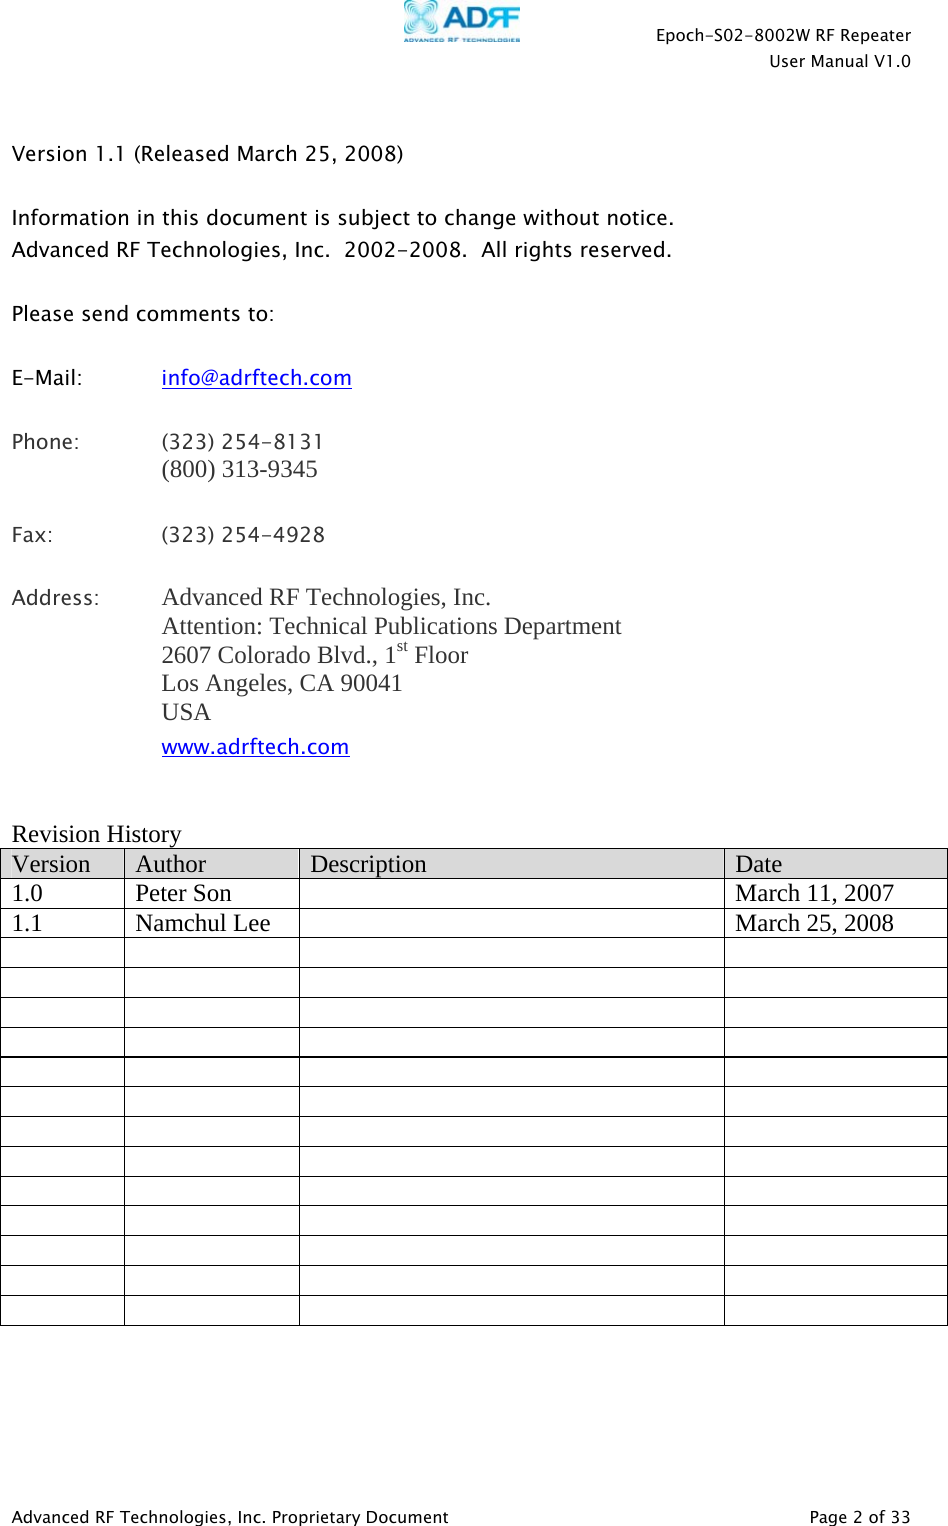    Epoch-S02-8002W RF Repeater  User Manual V1.0  Advanced RF Technologies, Inc. Proprietary Document   Page 2 of 33   Version 1.1 (Released March 25, 2008)  Information in this document is subject to change without notice. Advanced RF Technologies, Inc.  2002-2008.  All rights reserved.  Please send comments to:  E-Mail:   info@adrftech.com   Phone:   (323) 254-8131 (800) 313-9345  Fax:   (323) 254-4928  Address:  Advanced RF Technologies, Inc.   Attention: Technical Publications Department 2607 Colorado Blvd., 1st Floor Los Angeles, CA 90041 USA www.adrftech.com   Revision History Version  Author  Description  Date 1.0  Peter Son    March 11, 2007 1.1  Namchul Lee    March 25, 2008                                                                                